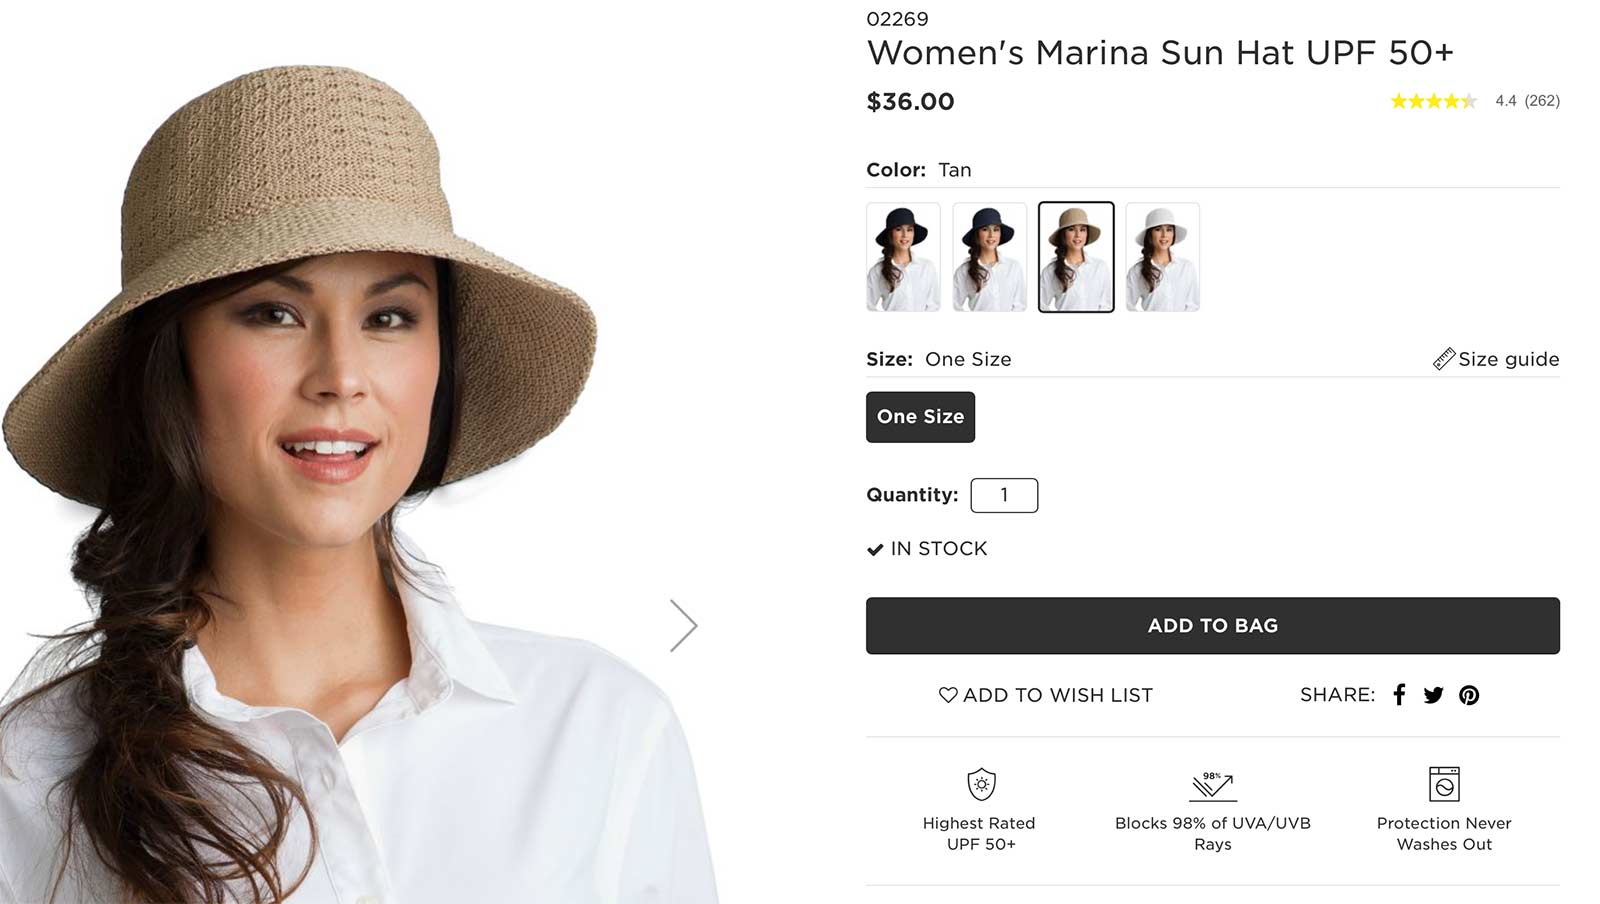 Coolibar product page with woman wearing a sun hat